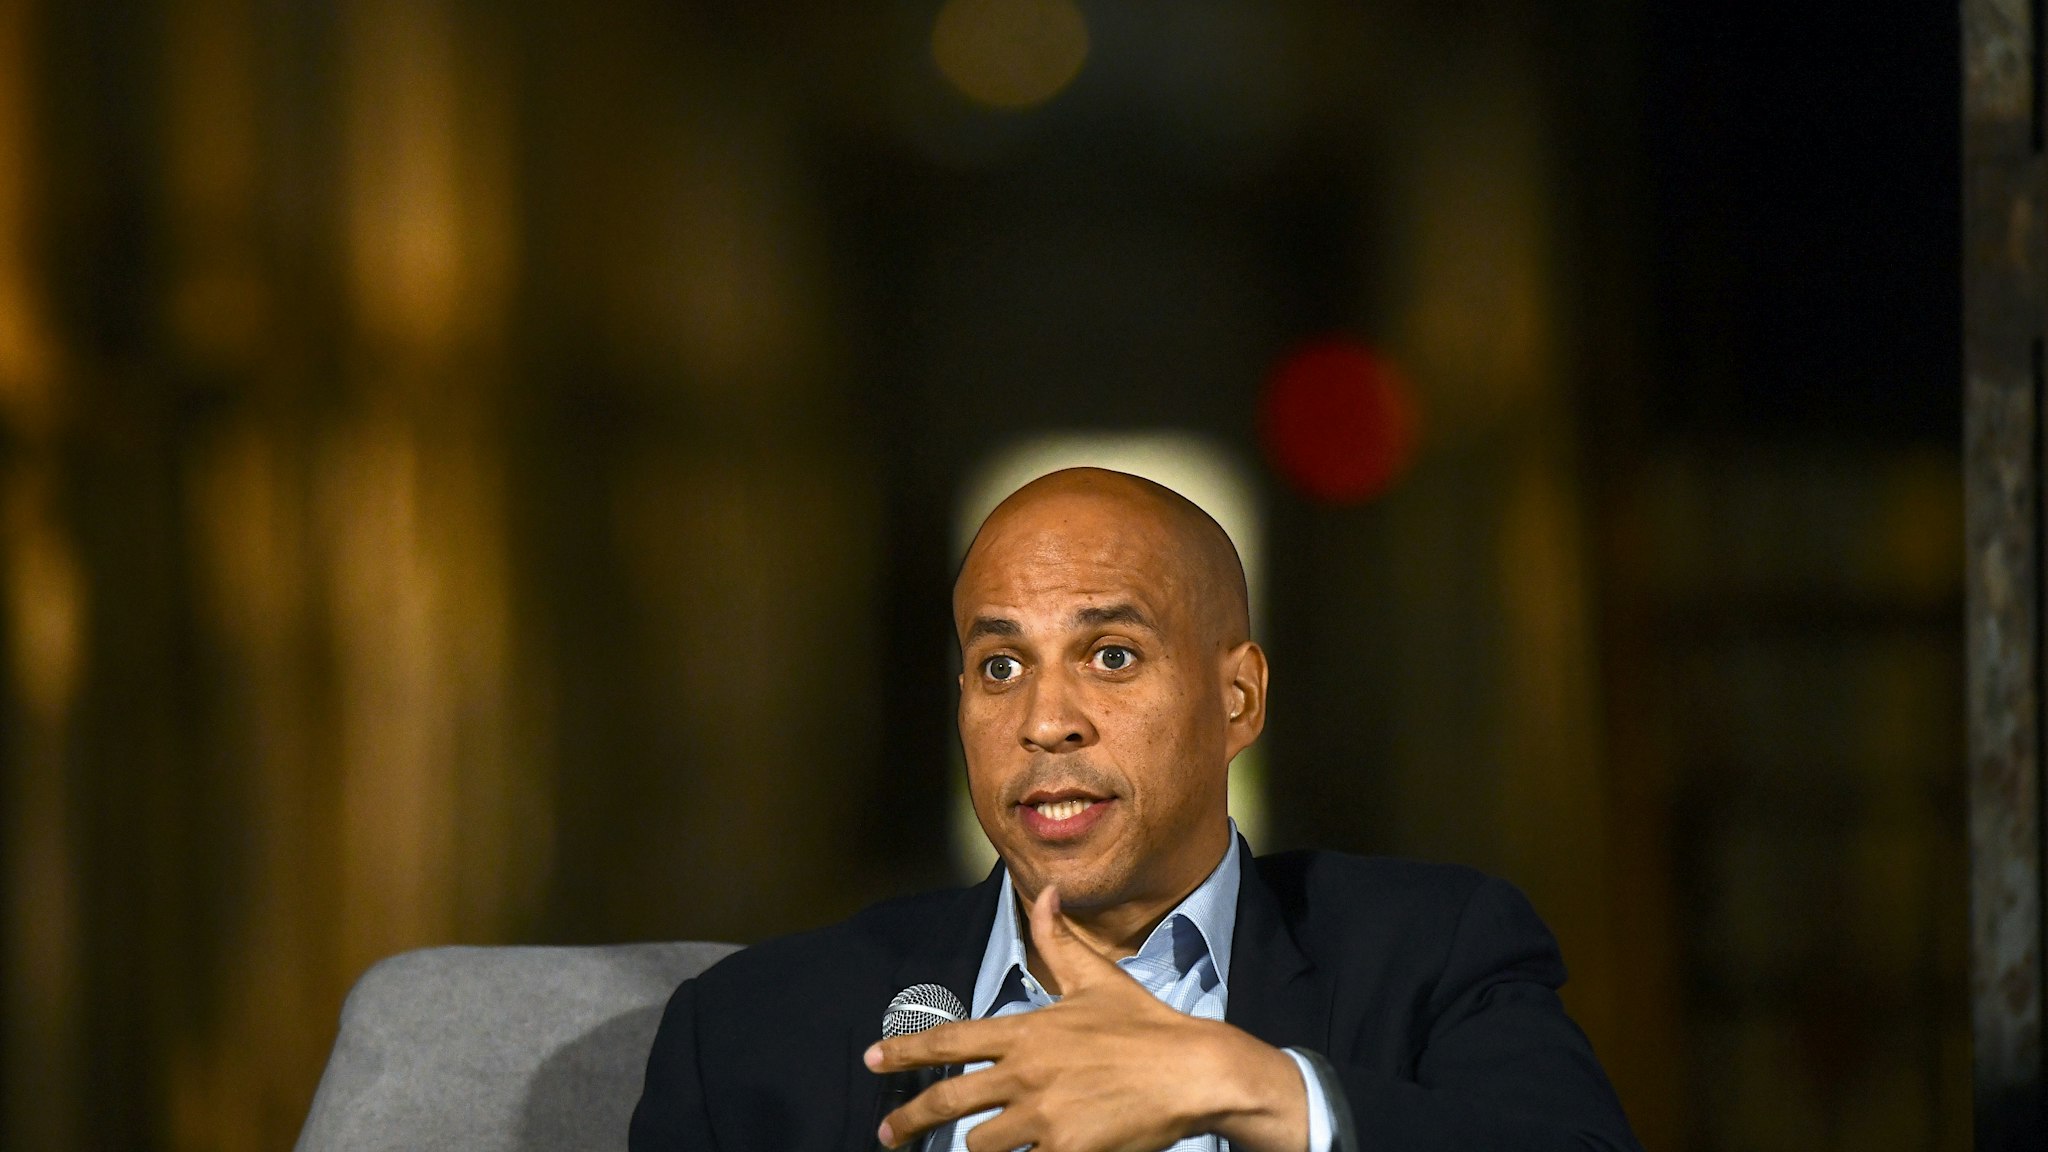 Democratic Presidential candidate, U.S. Senator Cory Booker (D-NJ) speaks during a town hall at the Eastern State Penitentiary on October 28, 2019 in Philadelphia, Pennsylvania. Formerly incarcerated individuals, their families, and others involved with the criminal justice system hosted the town hall with three 2020 Democratic presidential candidates. (Photo by Mark Makela/Getty Images)